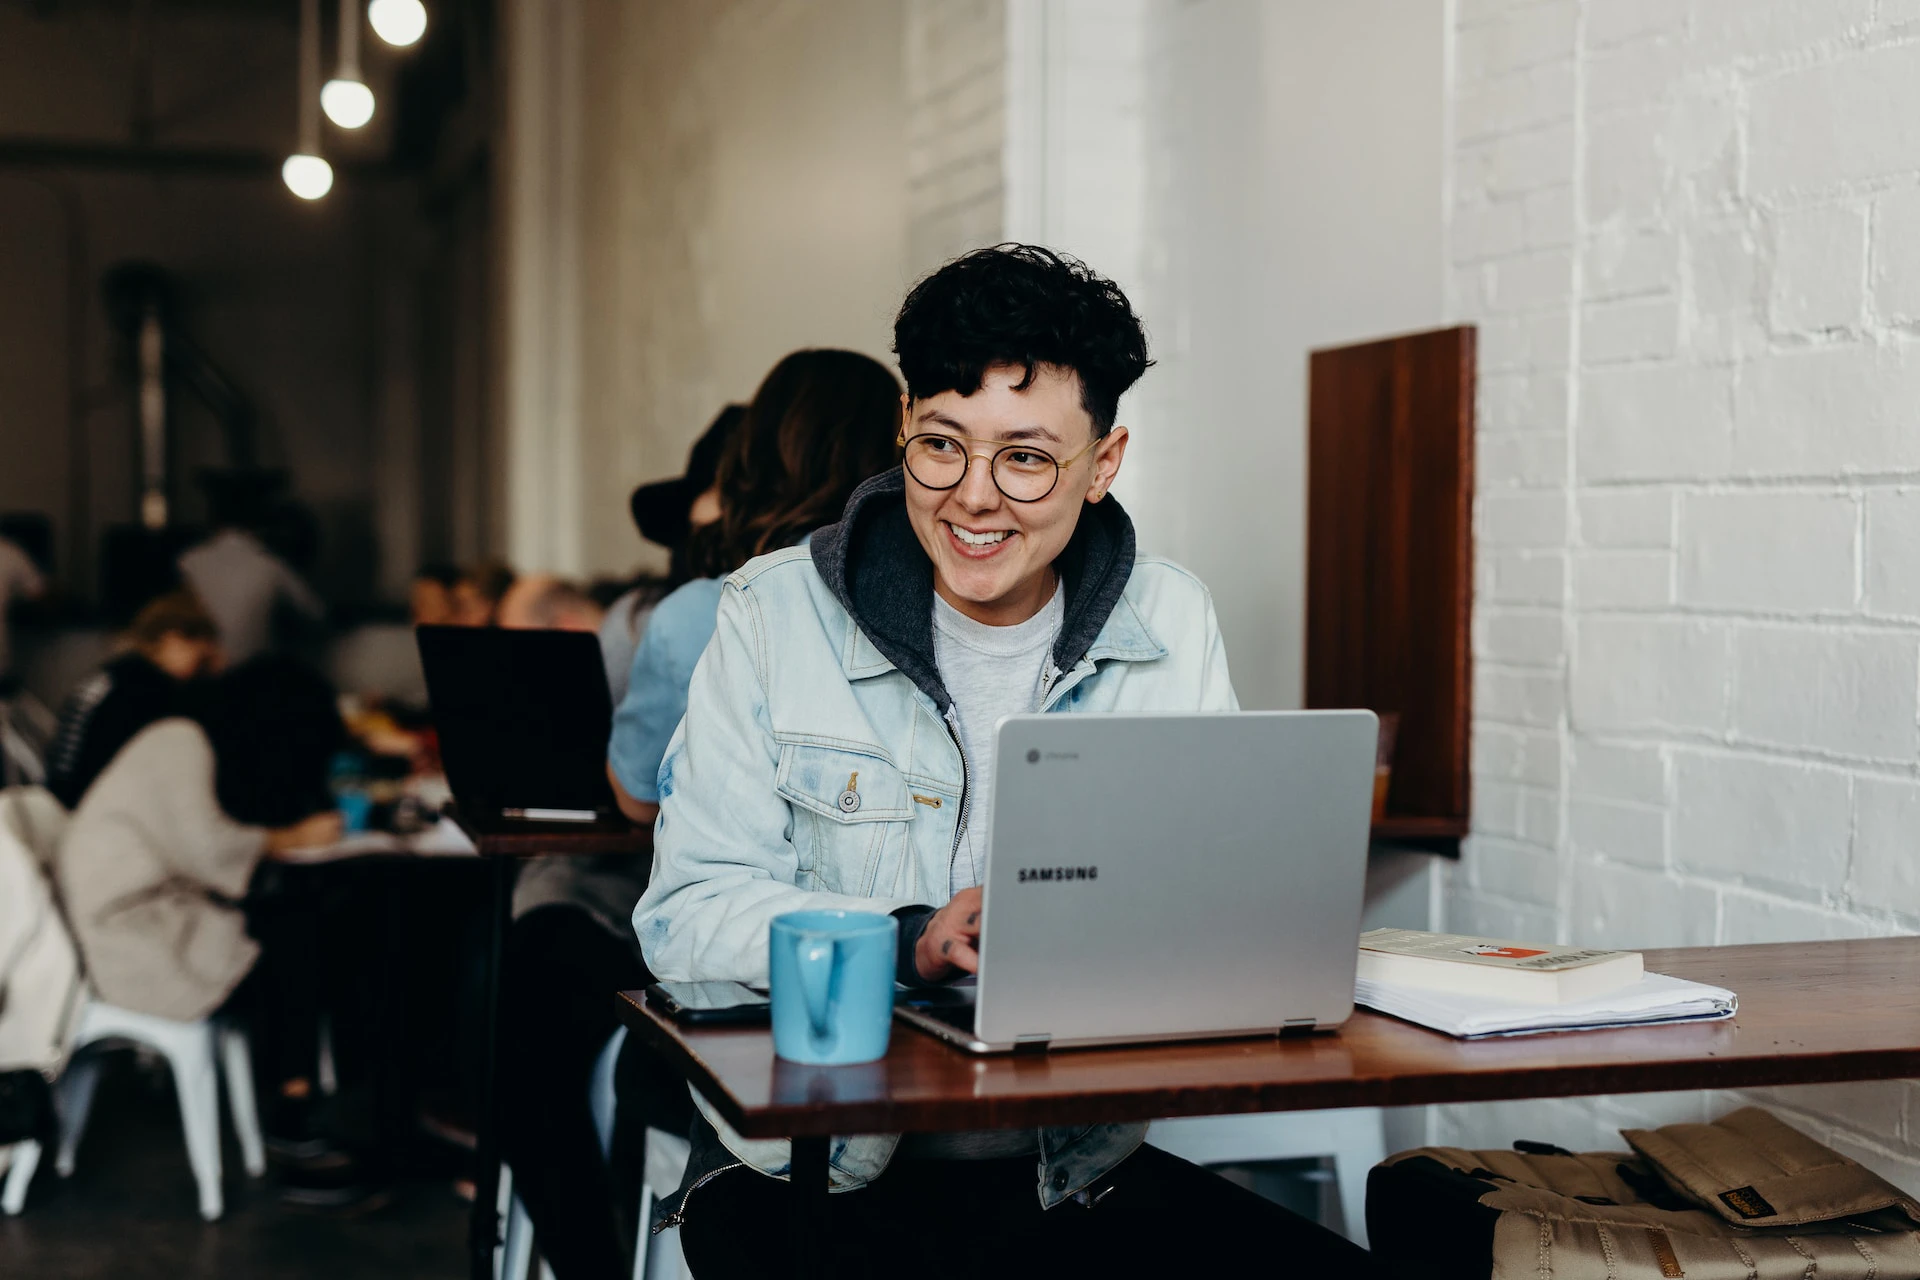 person with short dark hair and glasses sitting in a cafe working at a laptop and smiling